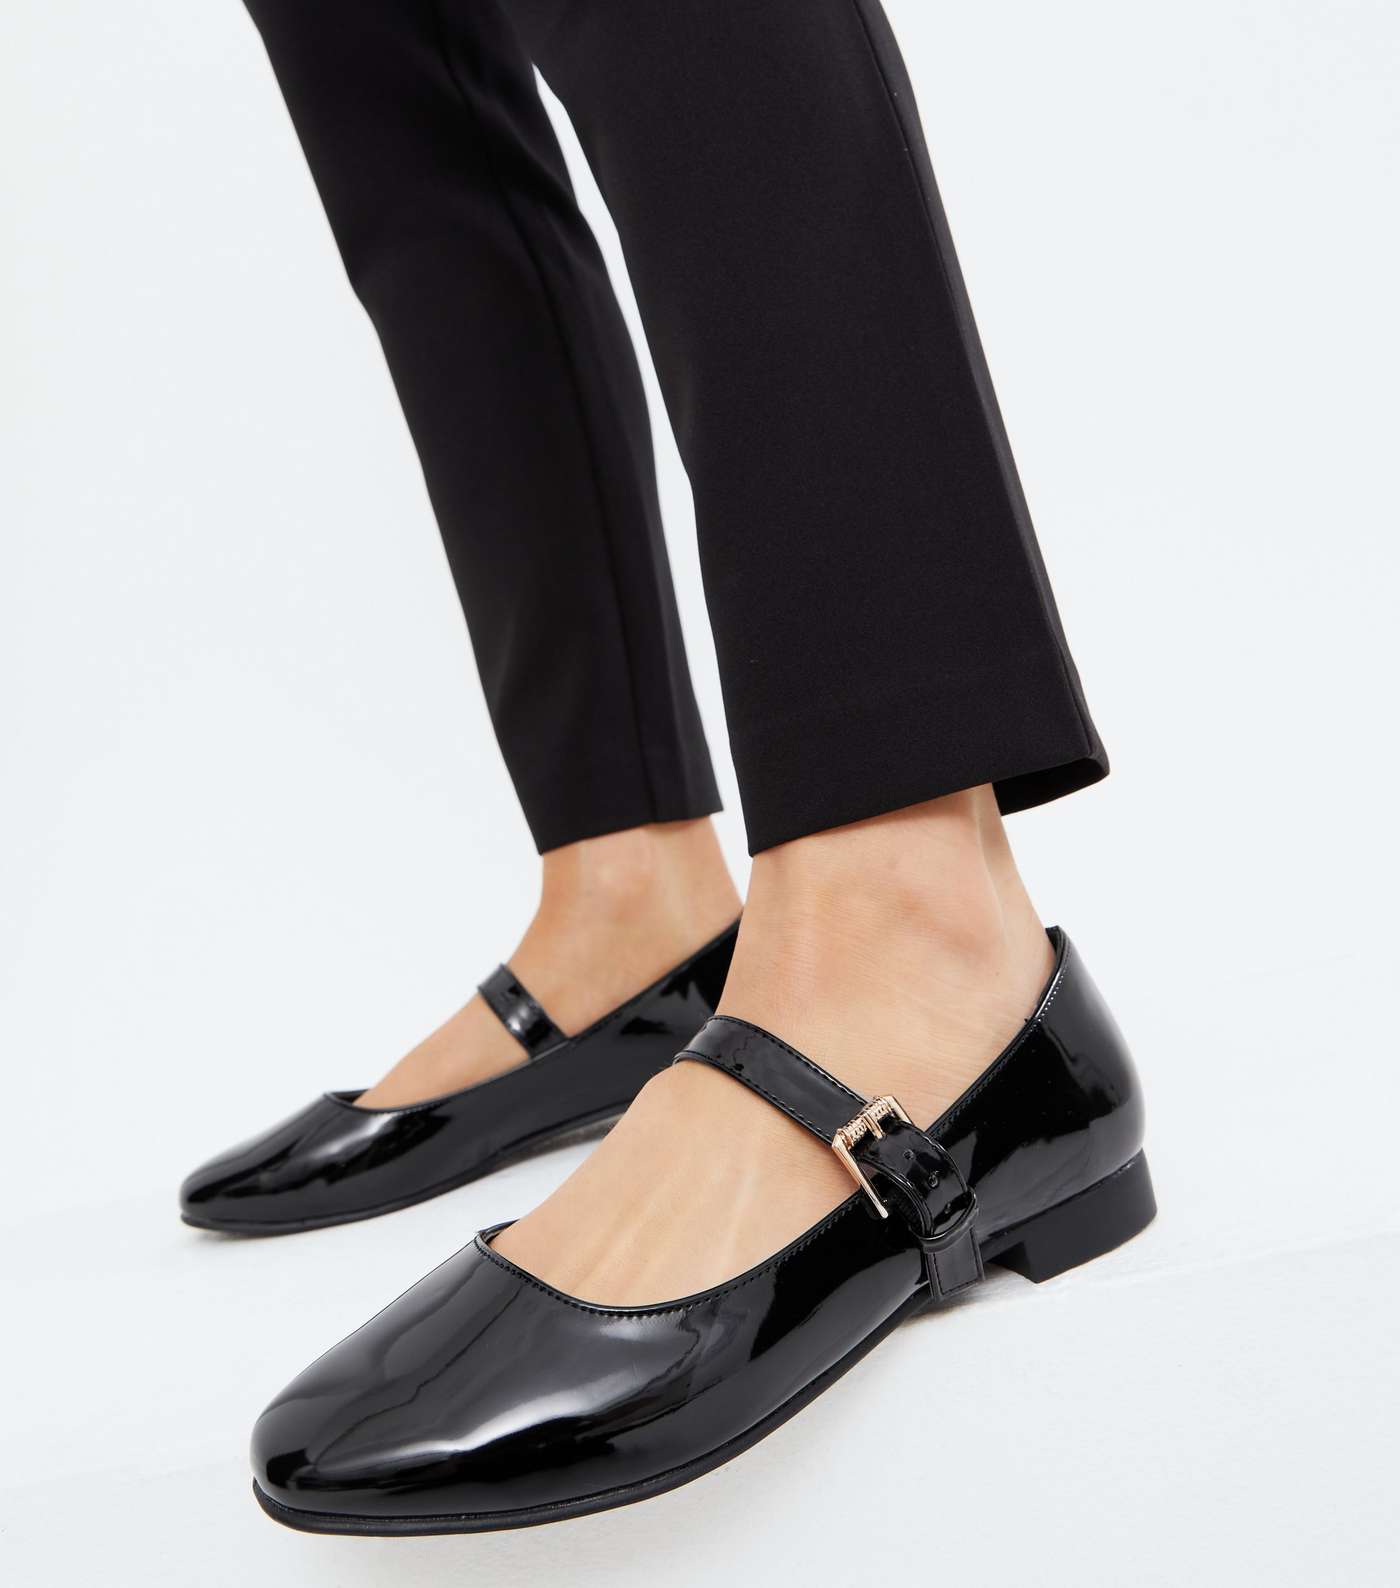 Wide Fit Black Patent Mary Jane Shoes  Image 2